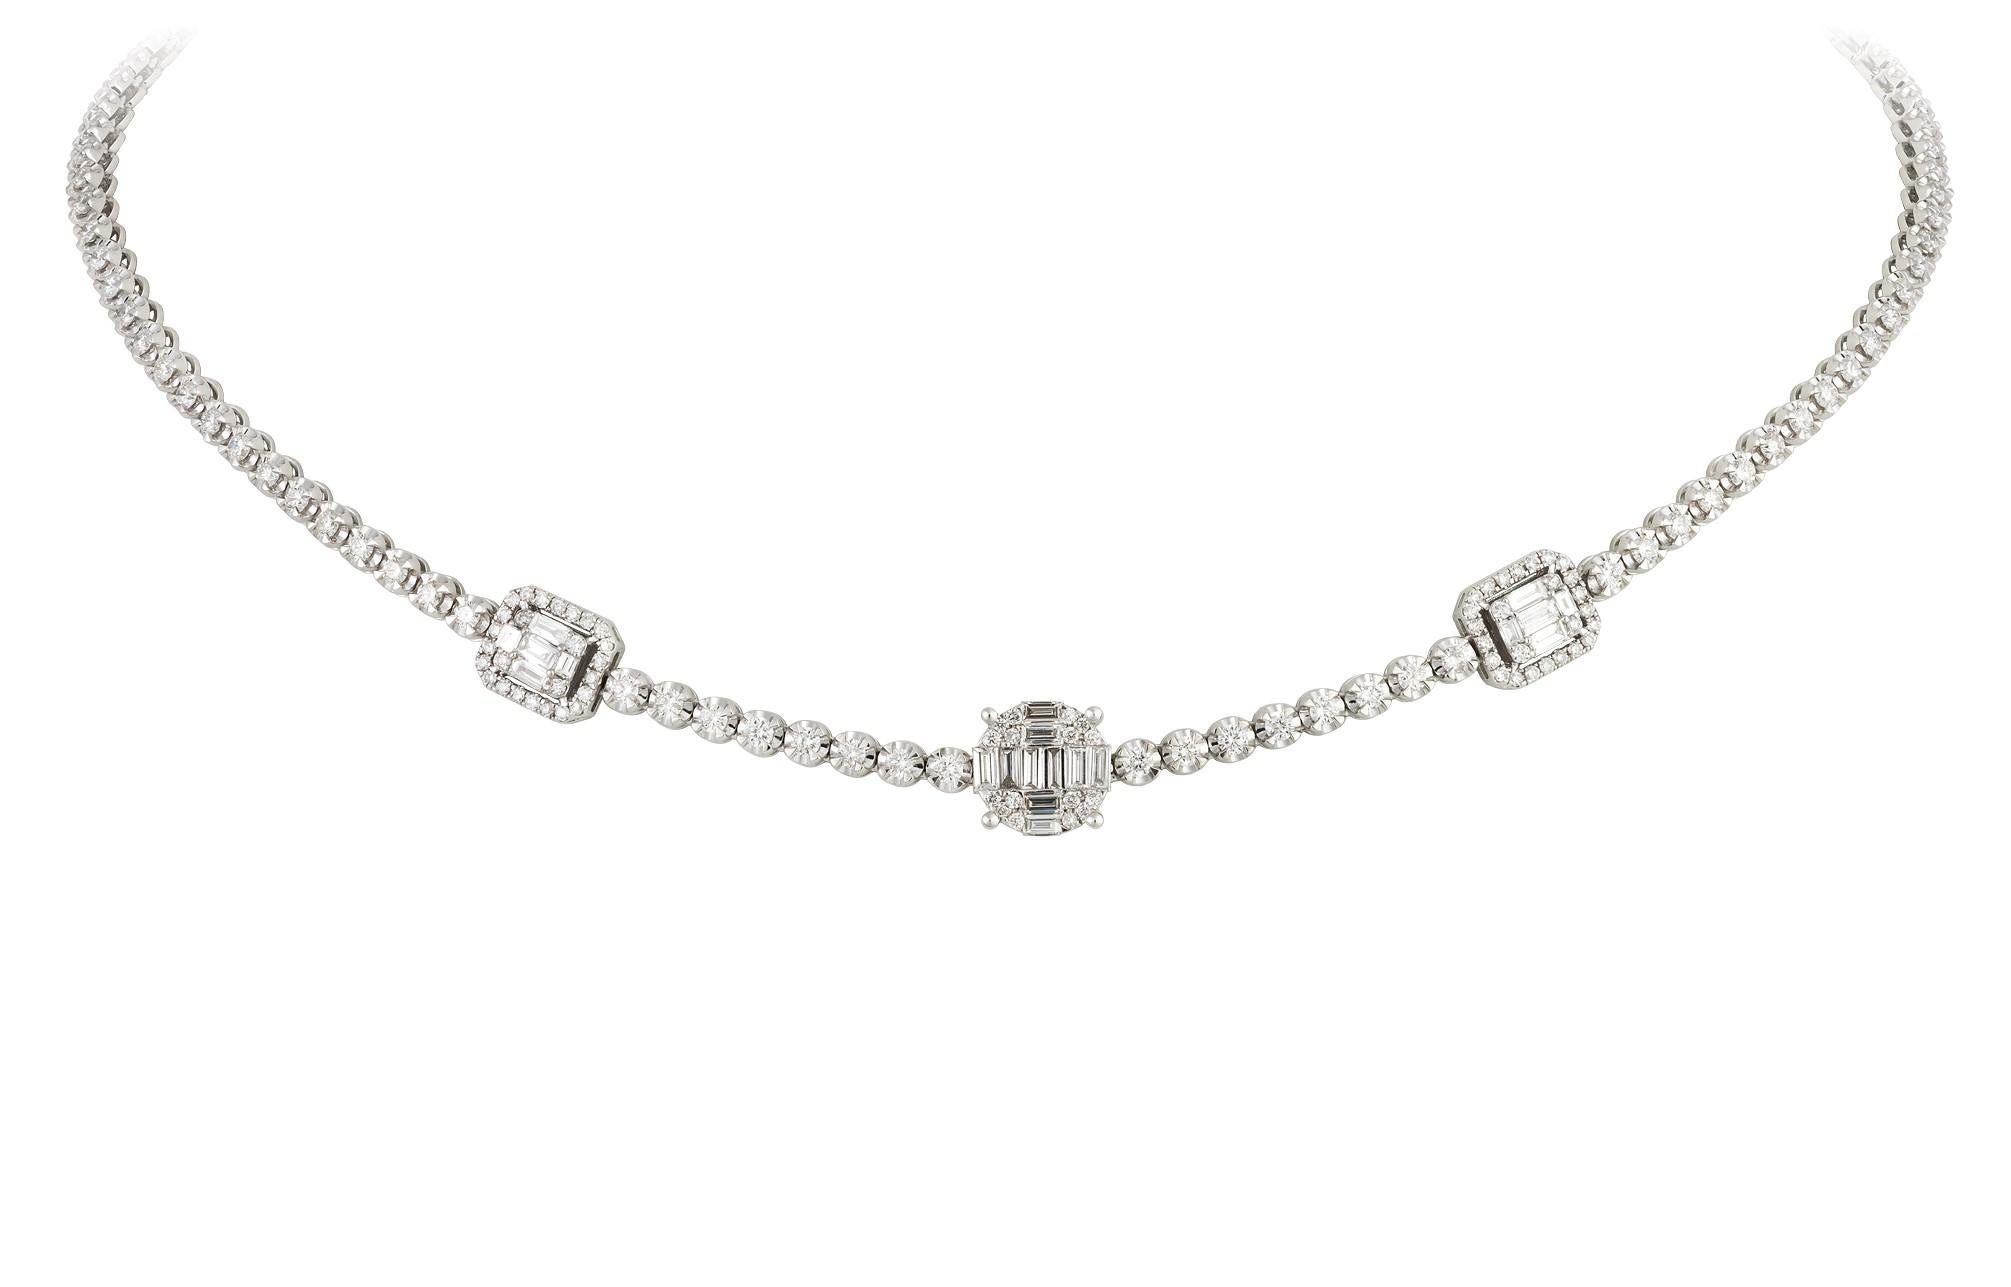 The Following Item we are offering is this Rare Important Radiant 18KT Gold Gorgeous Glittering and Sparkling Magnificent Fancy Cut Diamond Adjustable Choker Necklace. Necklace contains 3CTS of Beautiful Fancy Diamonds!!! Stones are Very Clean and